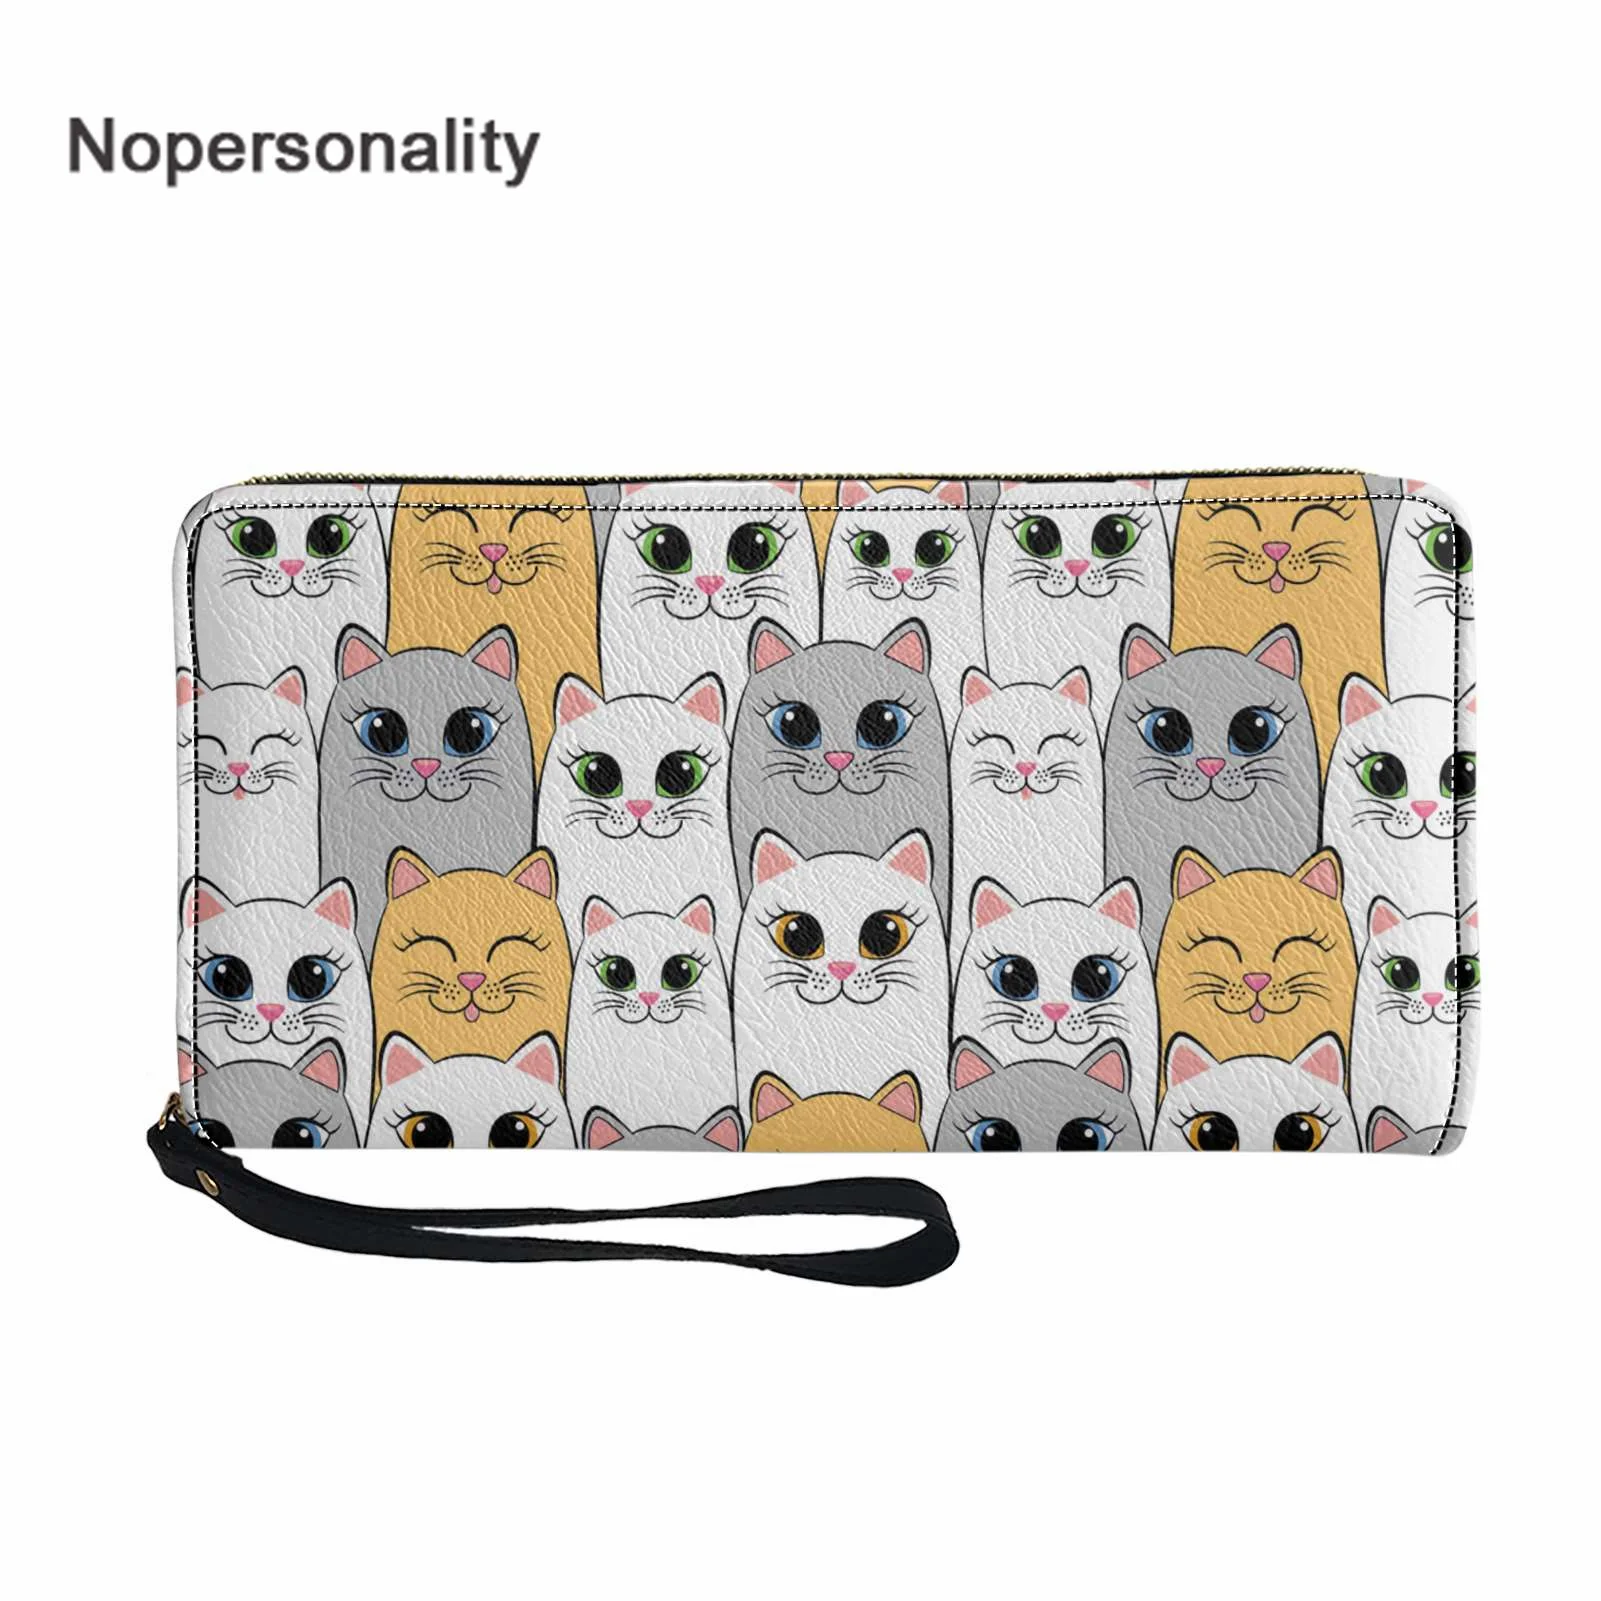 Nopersonality Women's Wallet Bag Fancy Sky and Cat Print Rectangle Leather Girl Purse Passport Cover Bag with Zipper for Lady